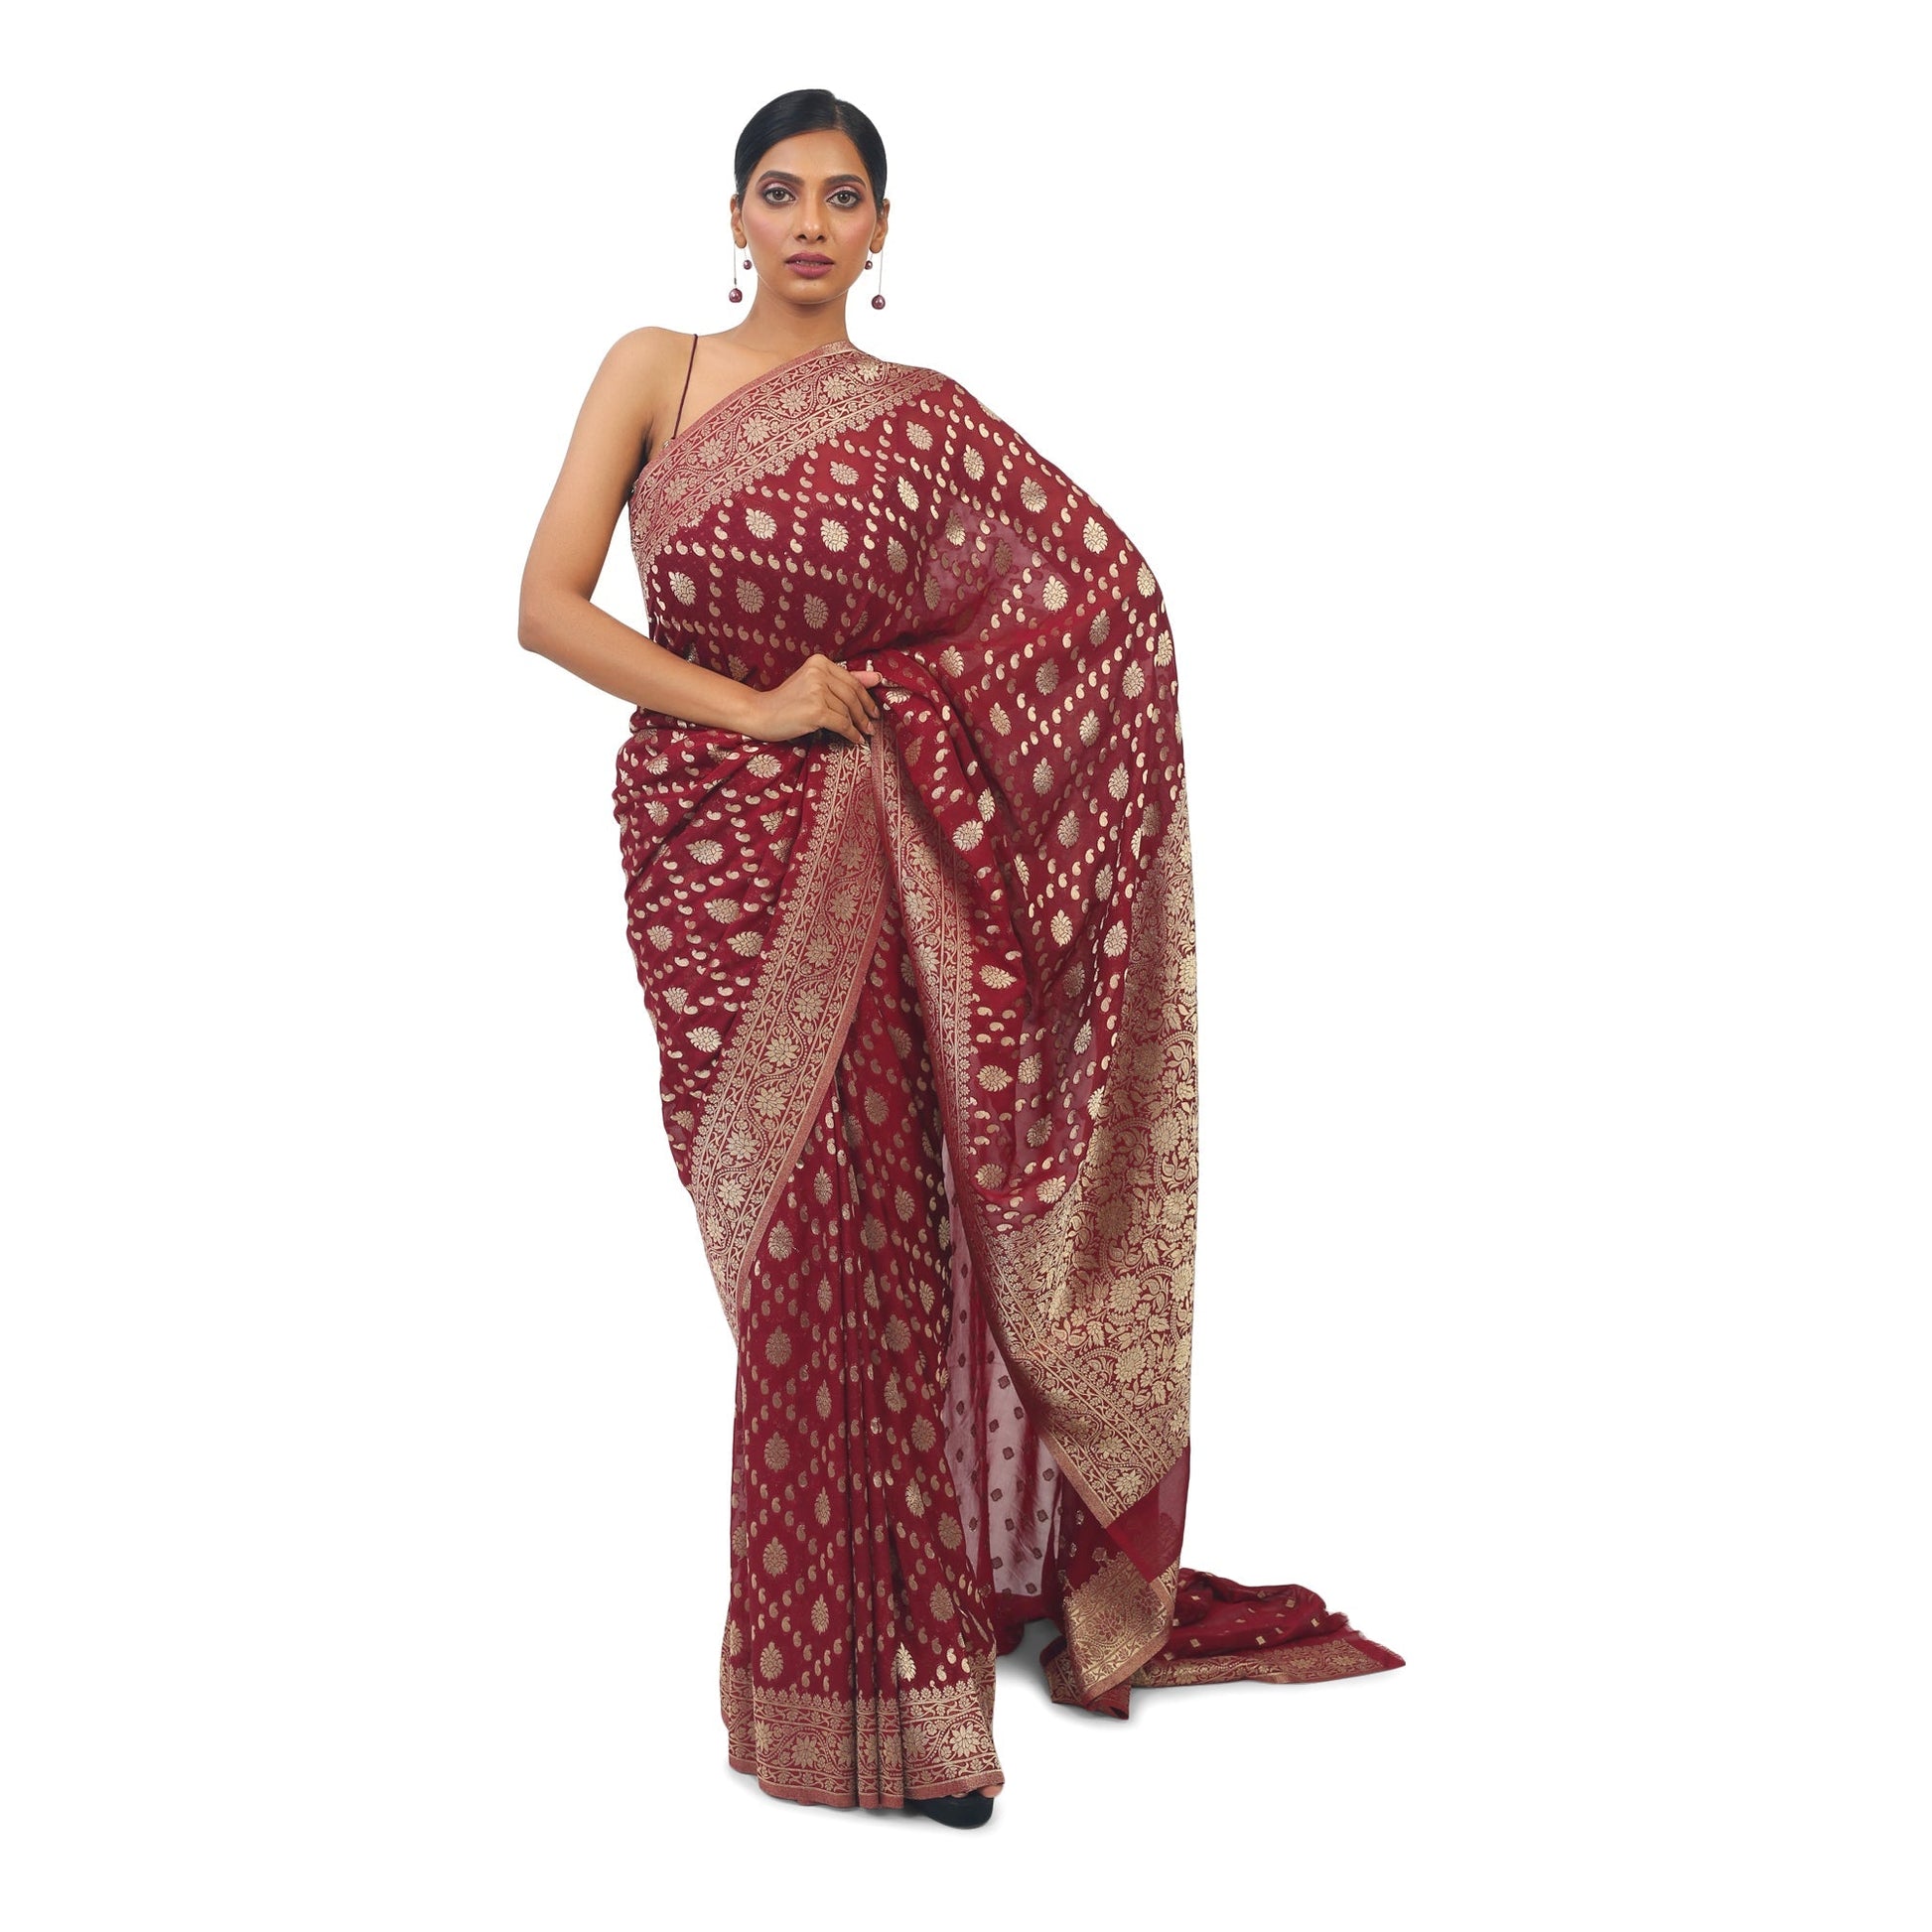 Maroon soft Georgette Banarsi Saree With golden work boarder Apparel & Accessories 50%off Cocktail Festive maroon Saree Soft Georgette wine thehangrmaroon-soft-georgette-banarsi-saree-with-golden-work-boarderthehangr-540260